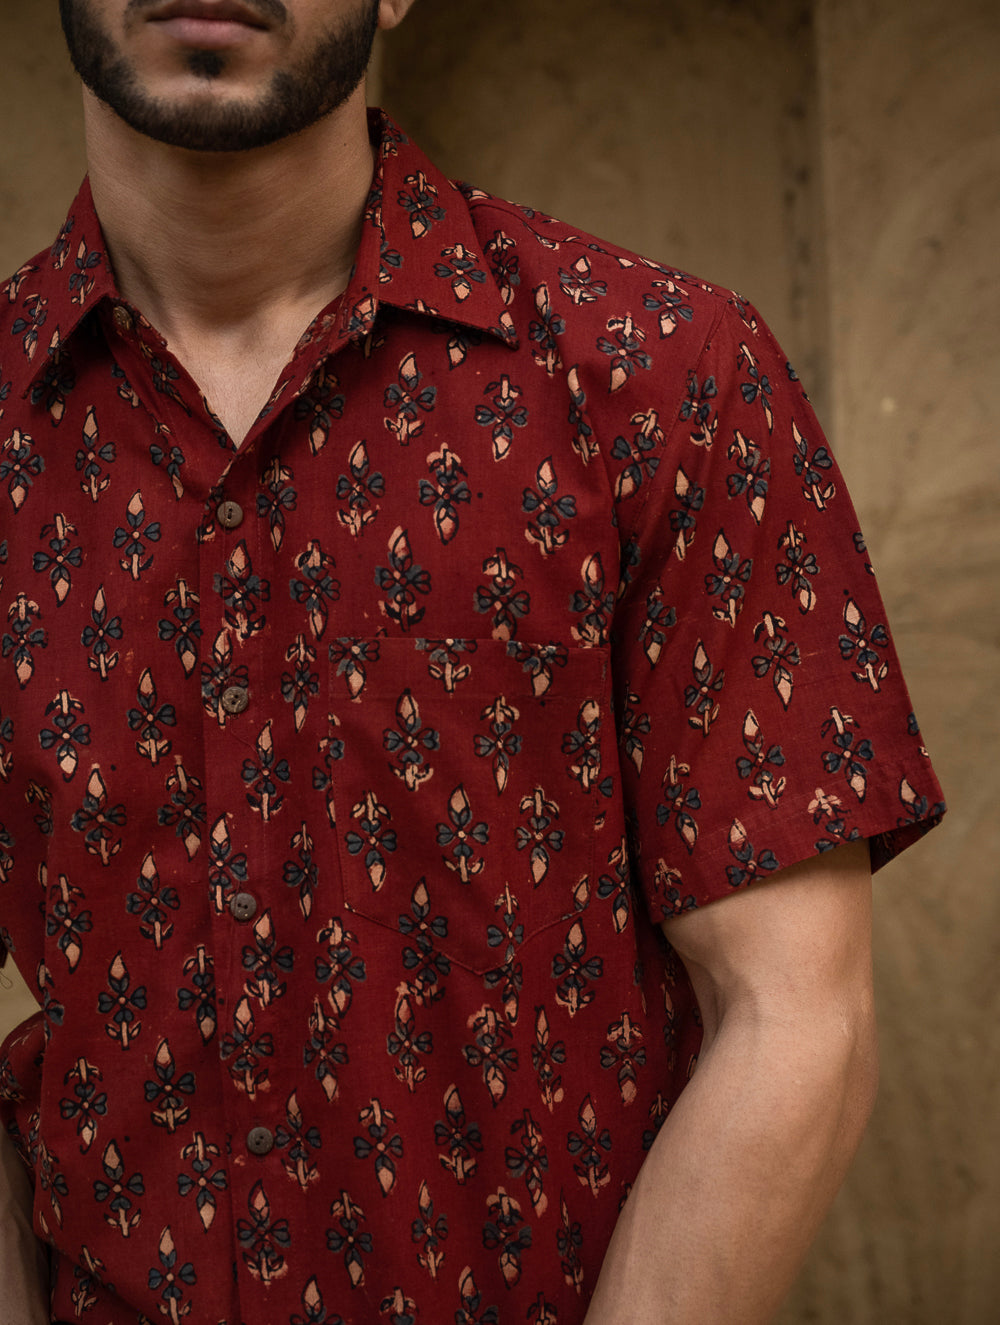 Load image into Gallery viewer, Ajrakh Hand Block Printed Cotton Shirt - Rust Floret